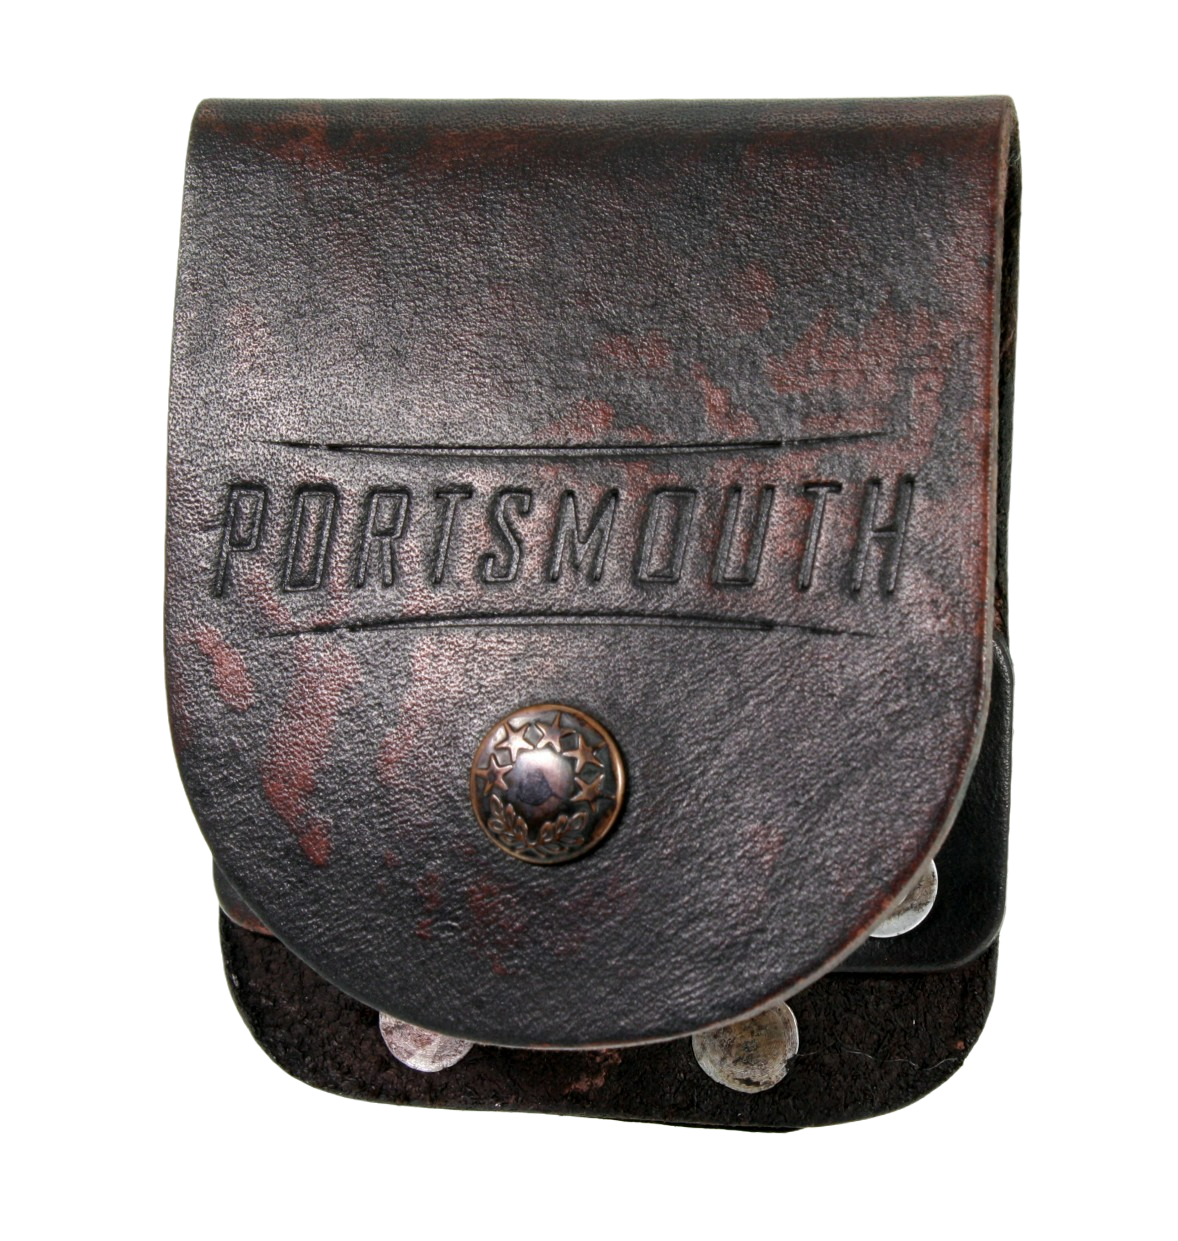 Front view, with Portsmouth logo embossed